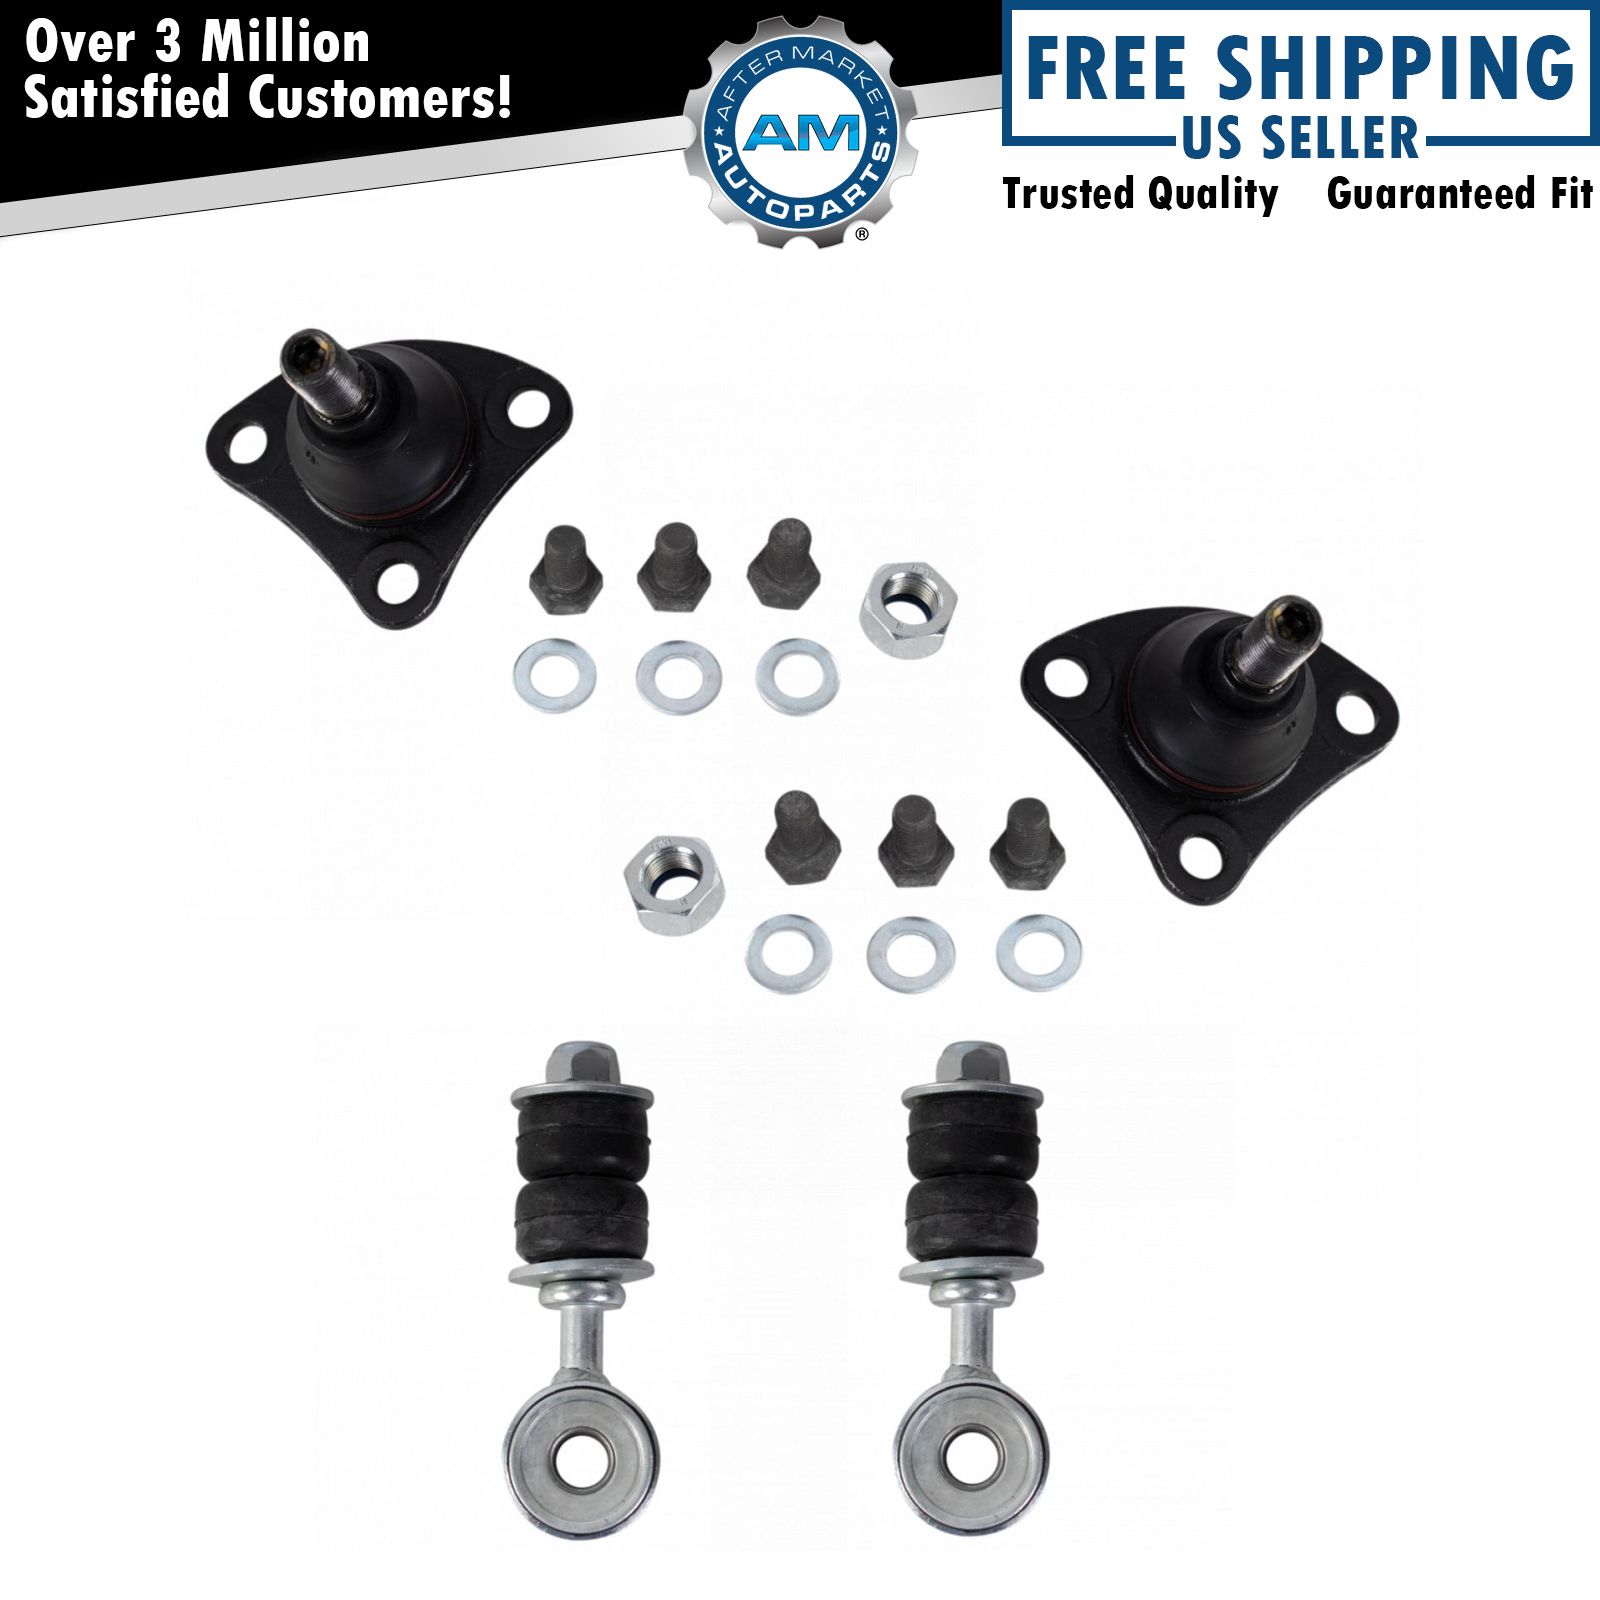 Front Ball Joint Sway Bar End Link Suspension Kit 4pc Set for Ram Promaster